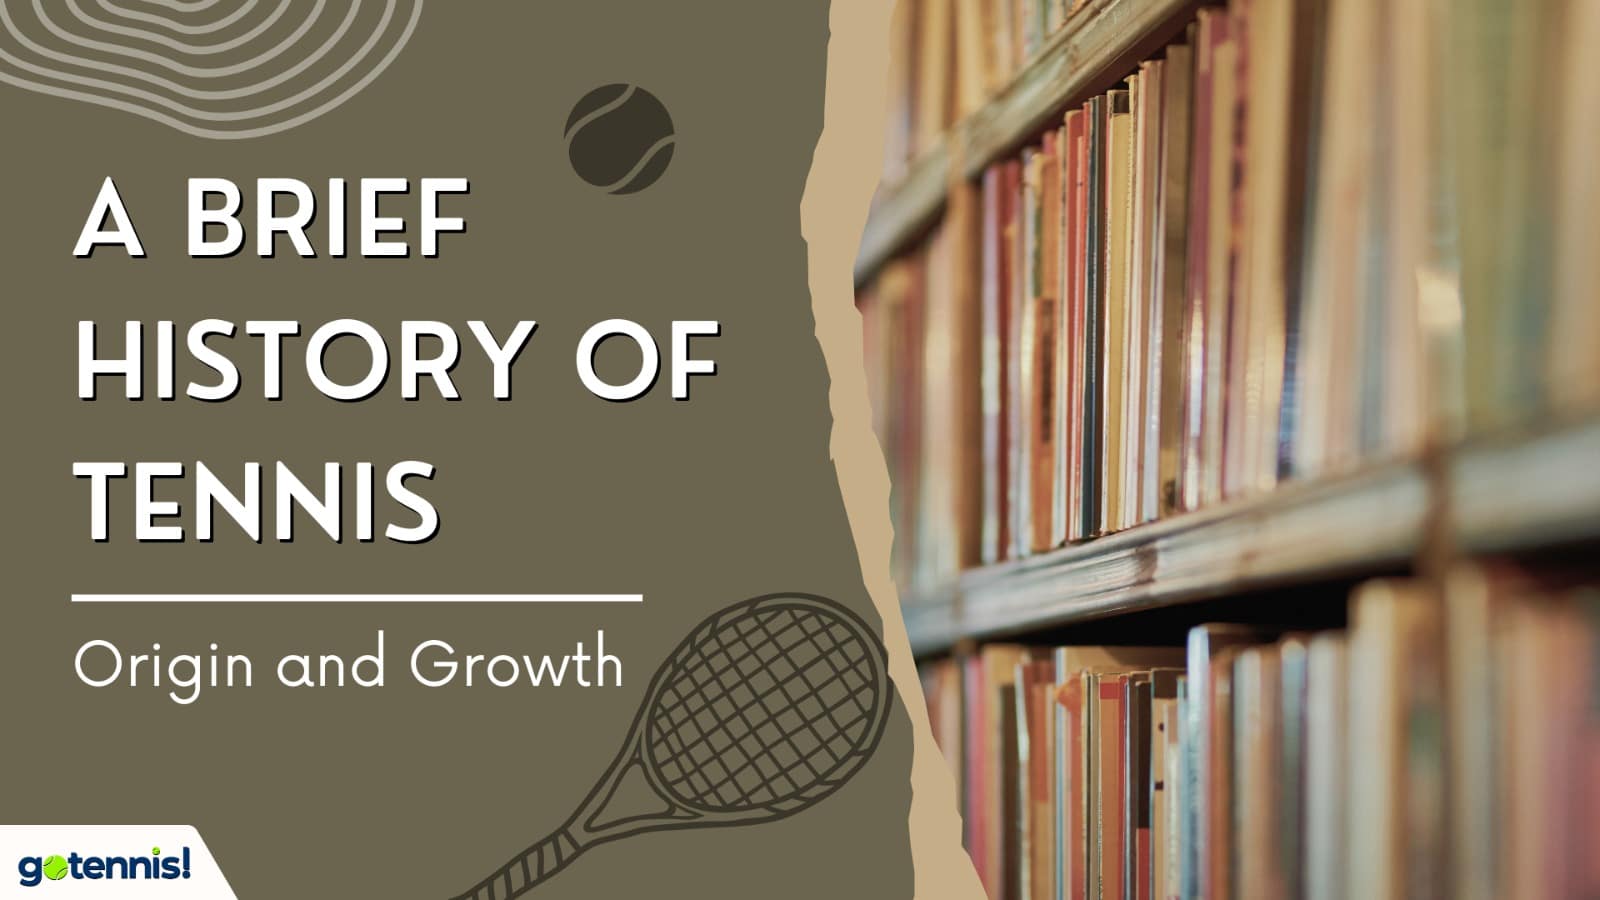 A Brief History of Tennis post image